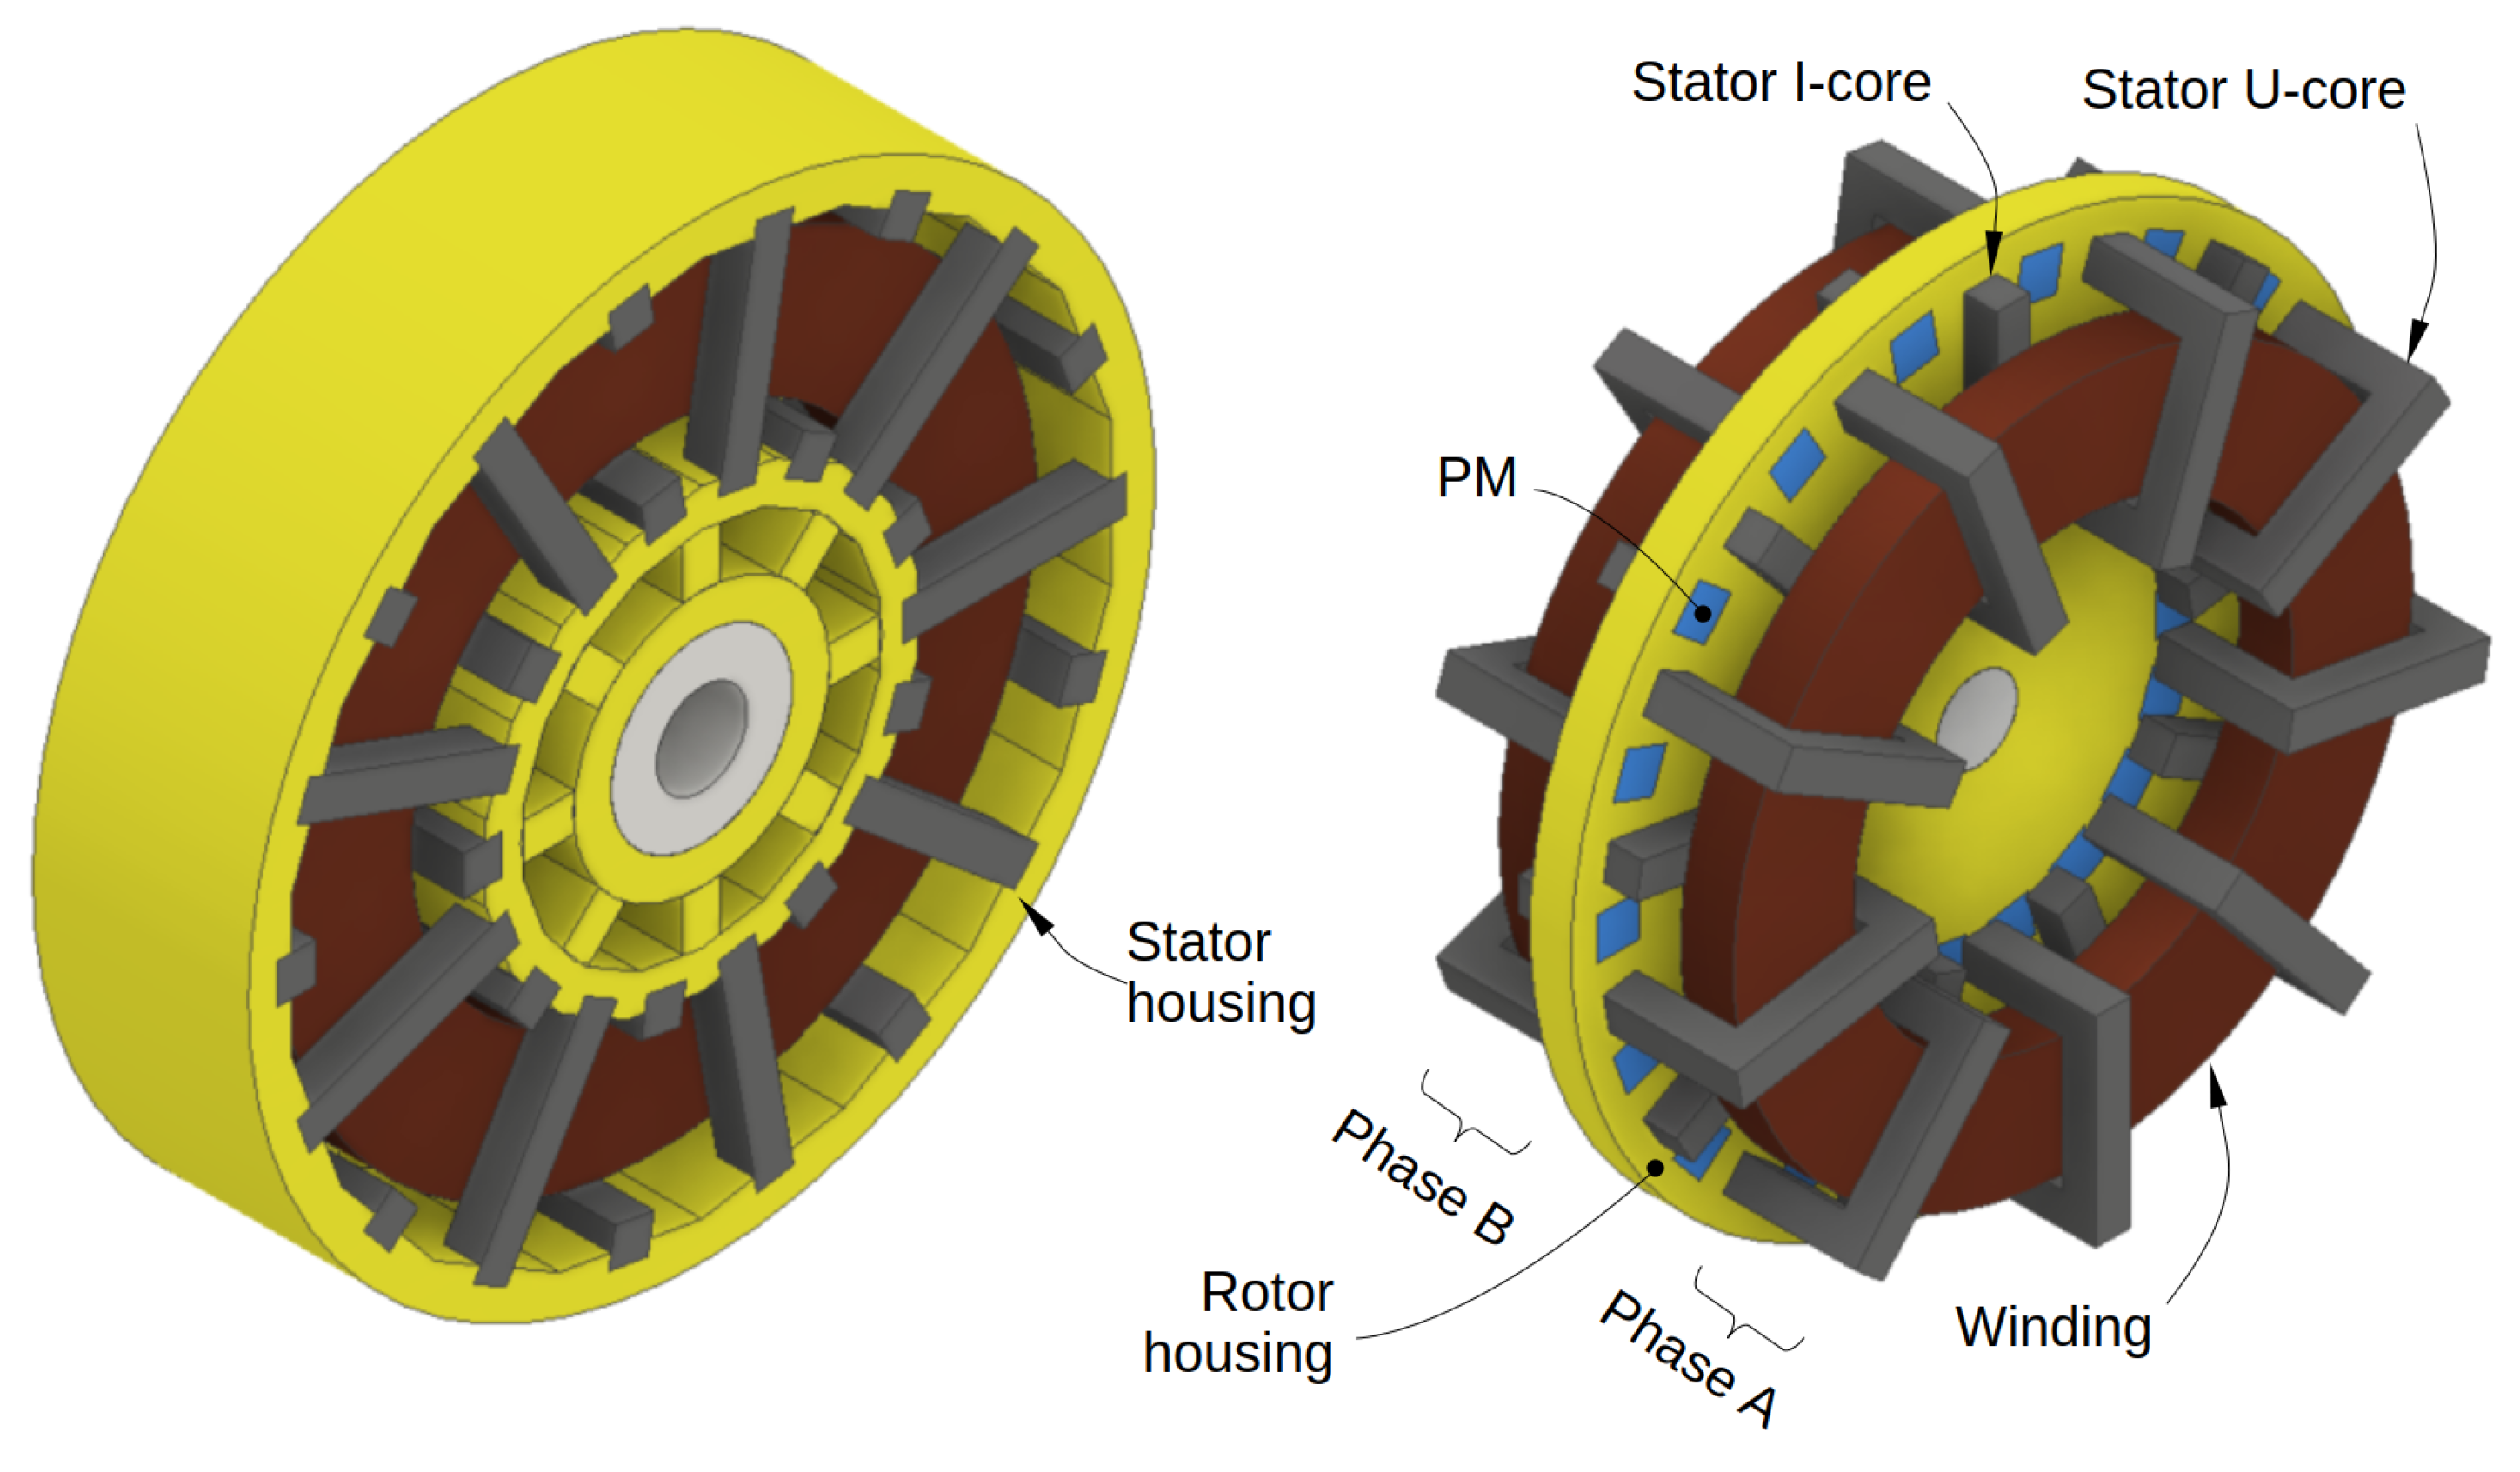 The stator REAC_v2-2 radial distribution of the outlet pitch angle and